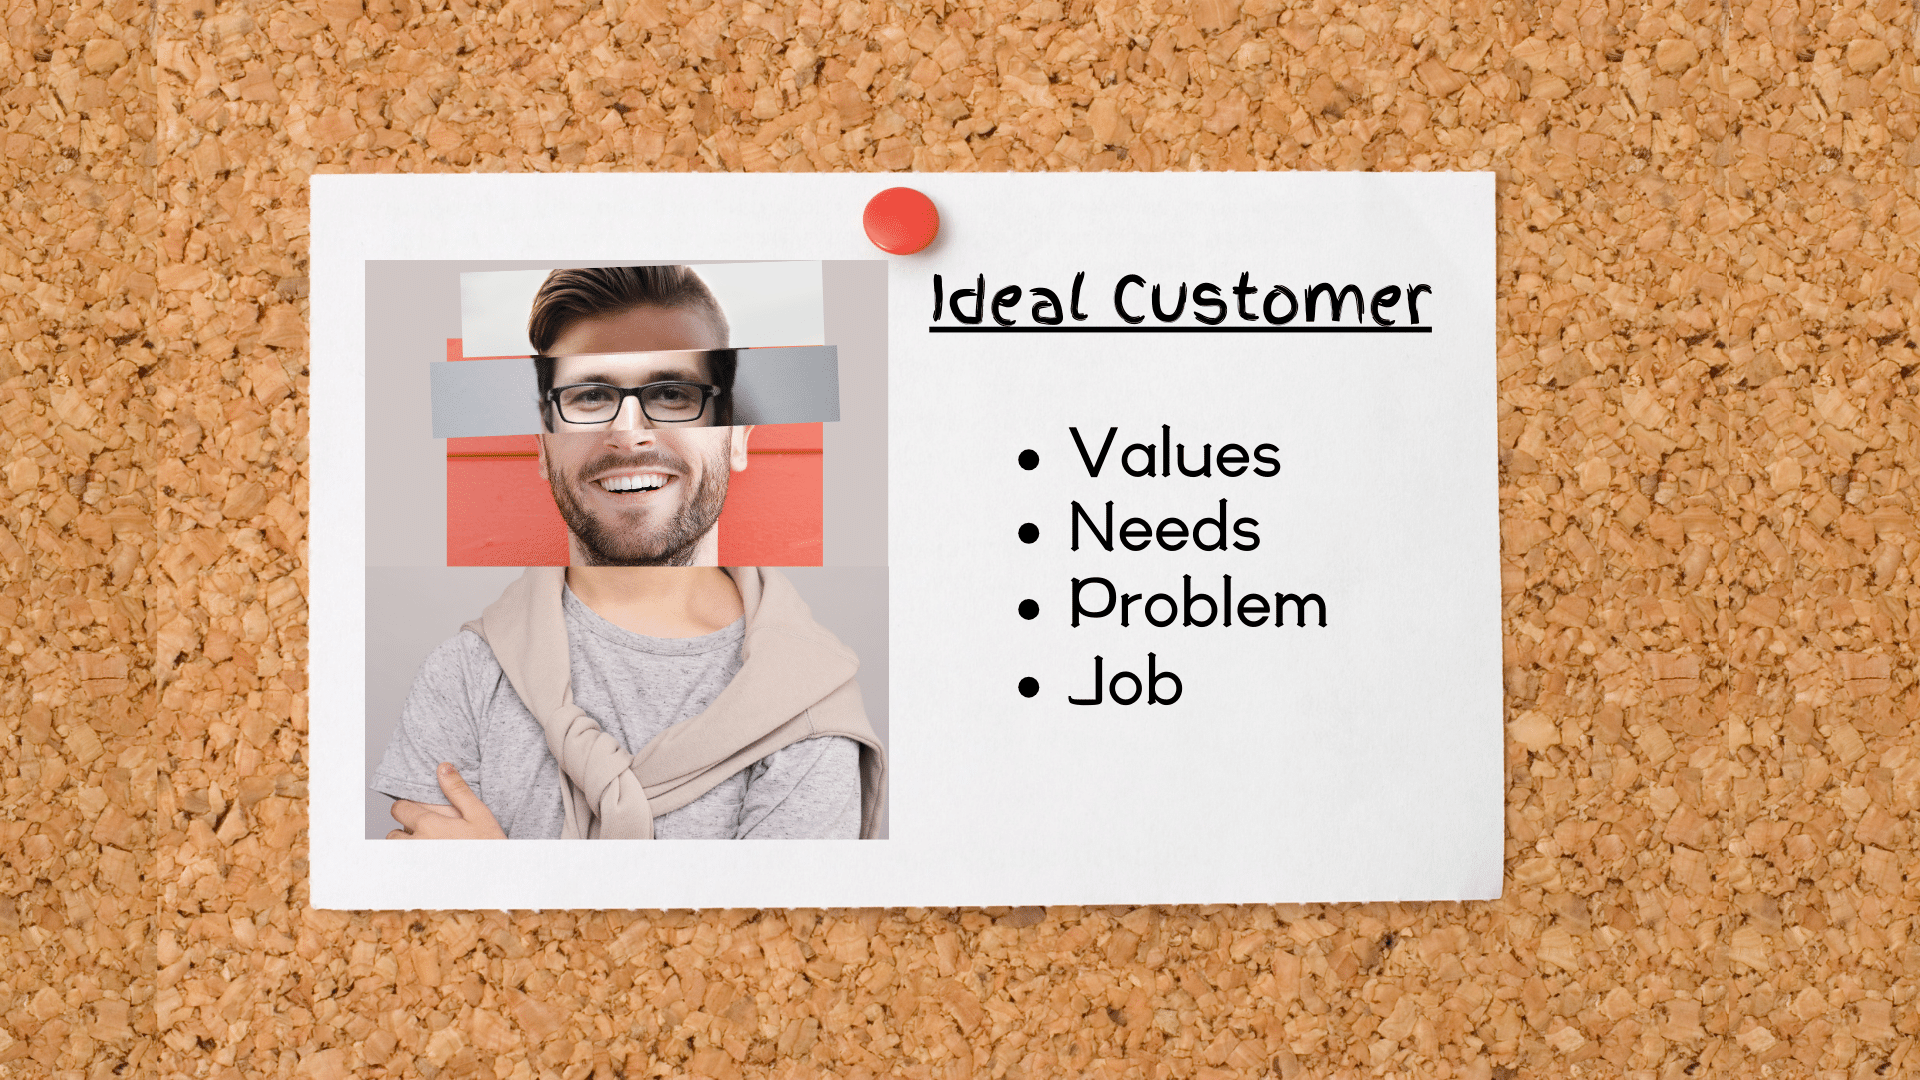 Effectively Targeting Your Marketing: How to Make a Great Ideal Customer Profile